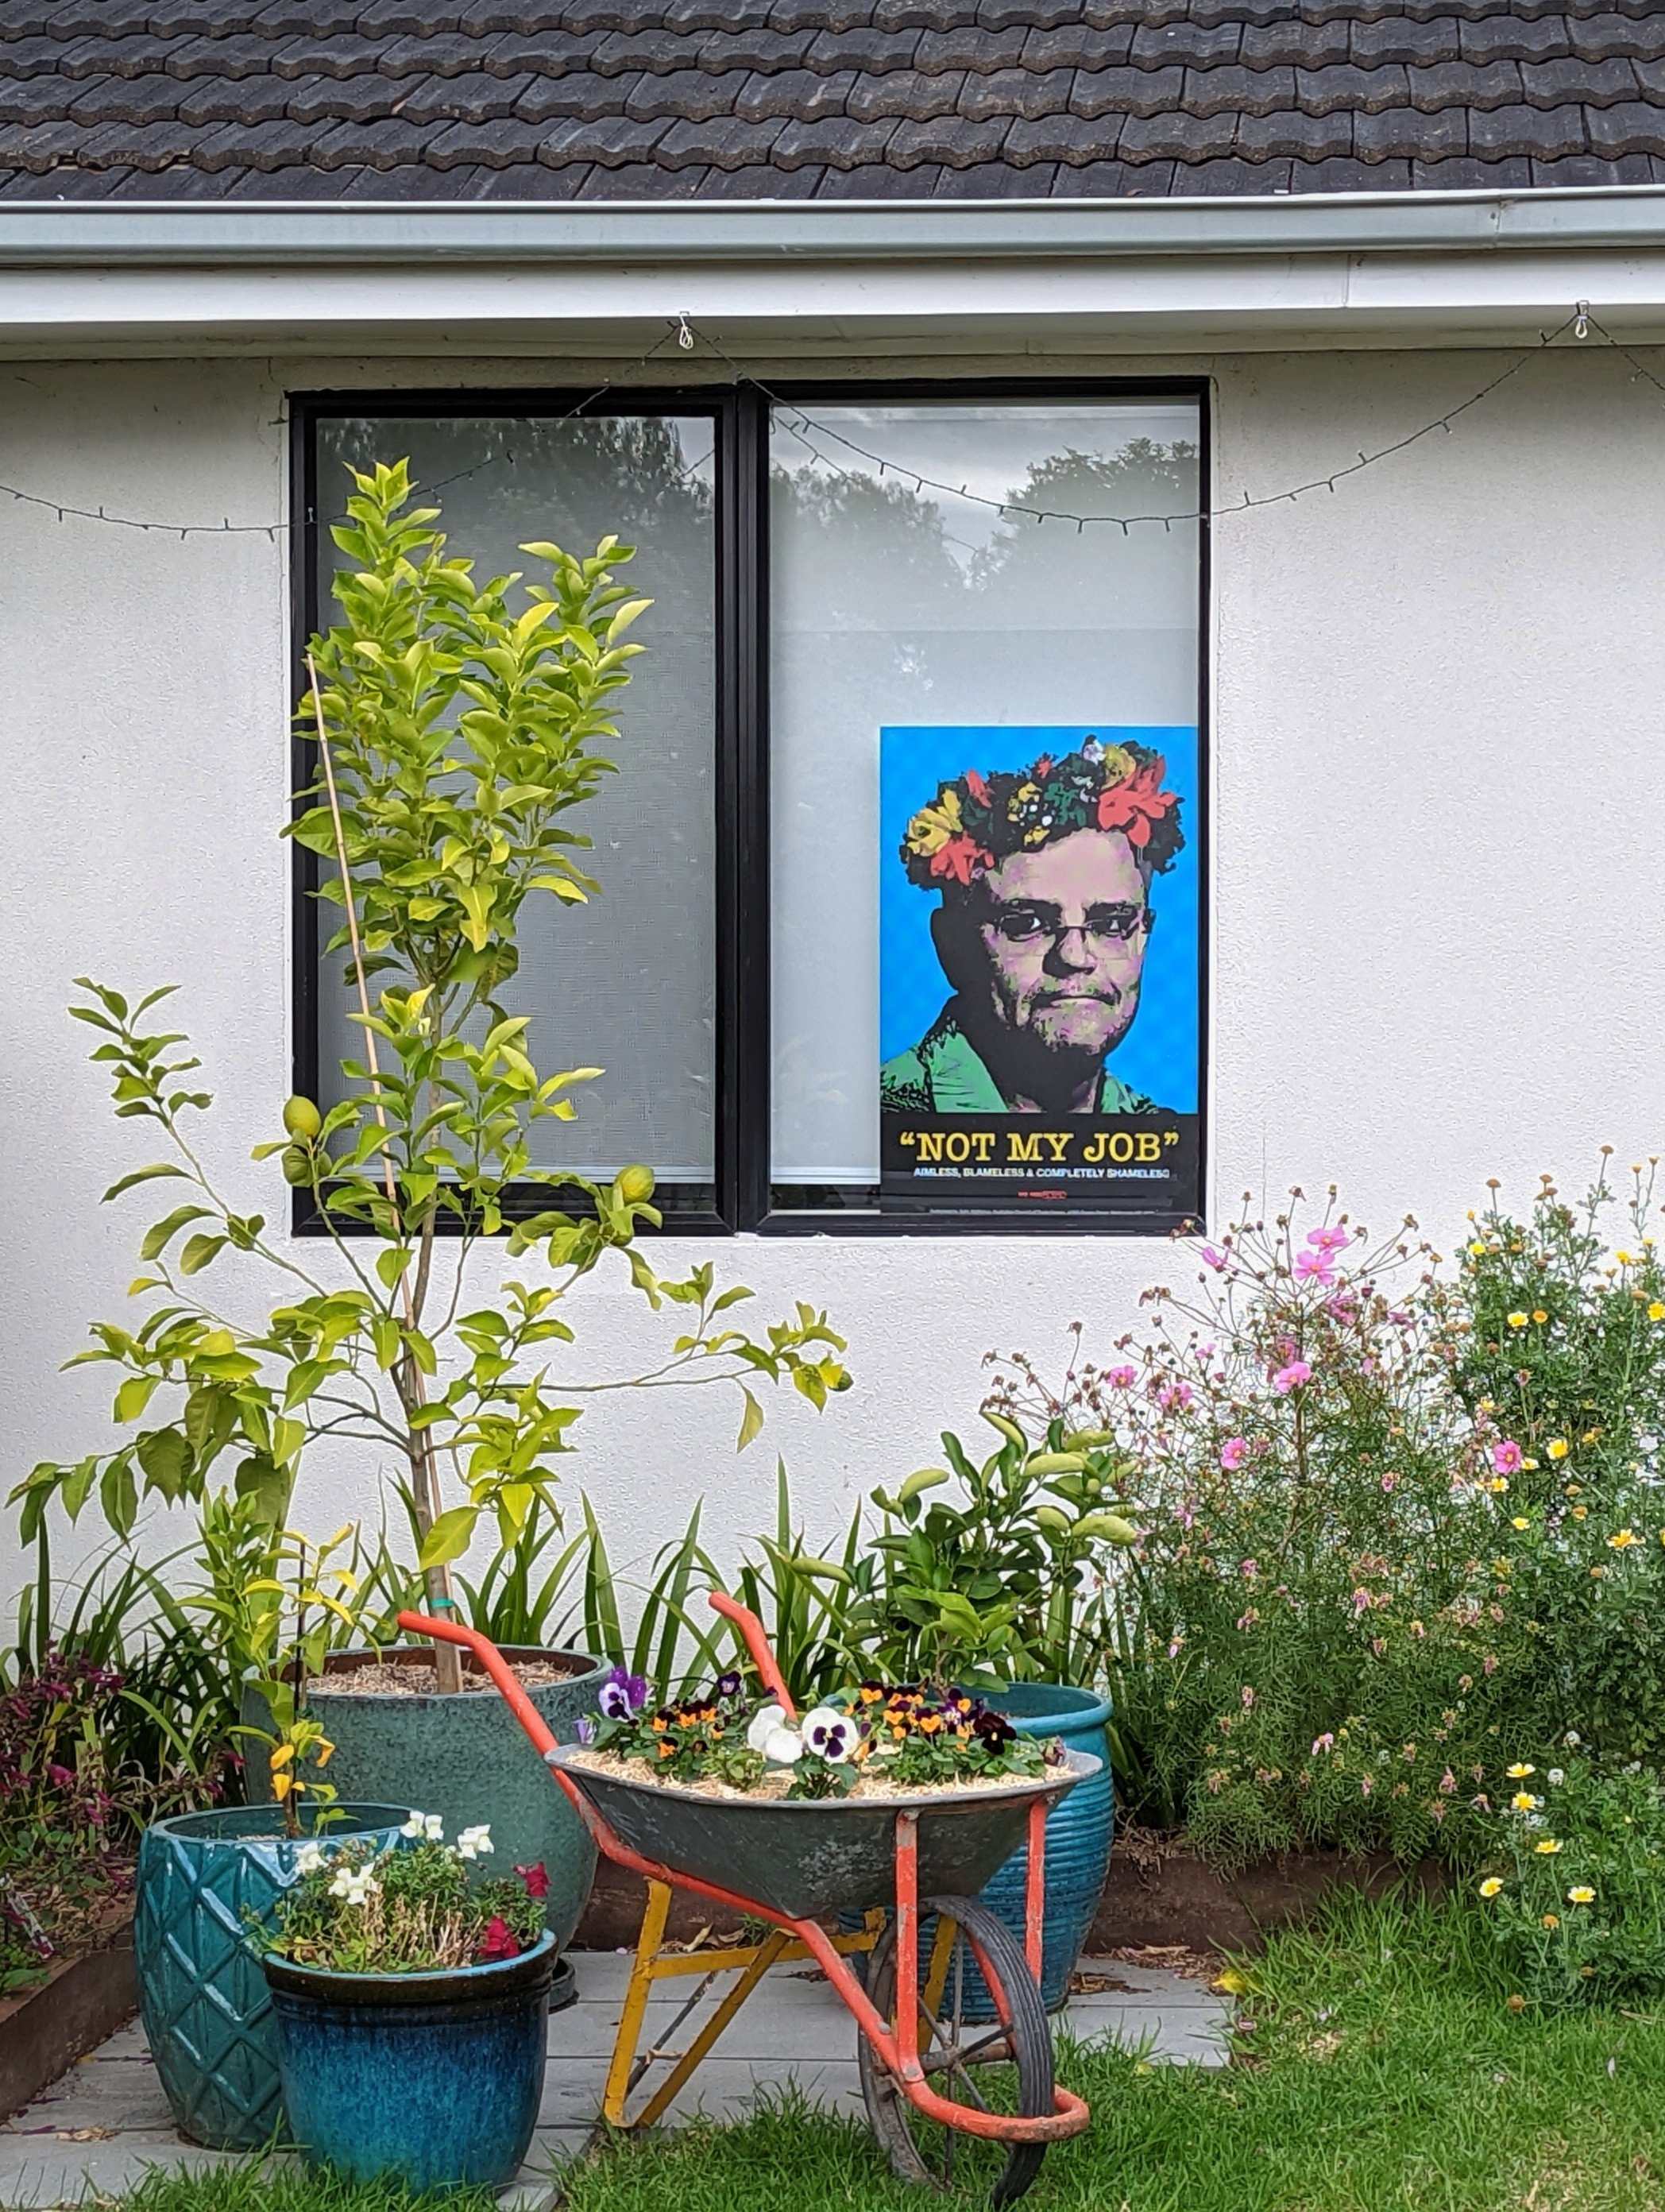  Photo of an election sign installed in the window of a house. The sign shows Australian prime Minister Scott Morrison wearing Hawaiian shirt and a garland of flowers on his head. Below that is text that reads, in quotation marks, “NOT MY JOB”. 